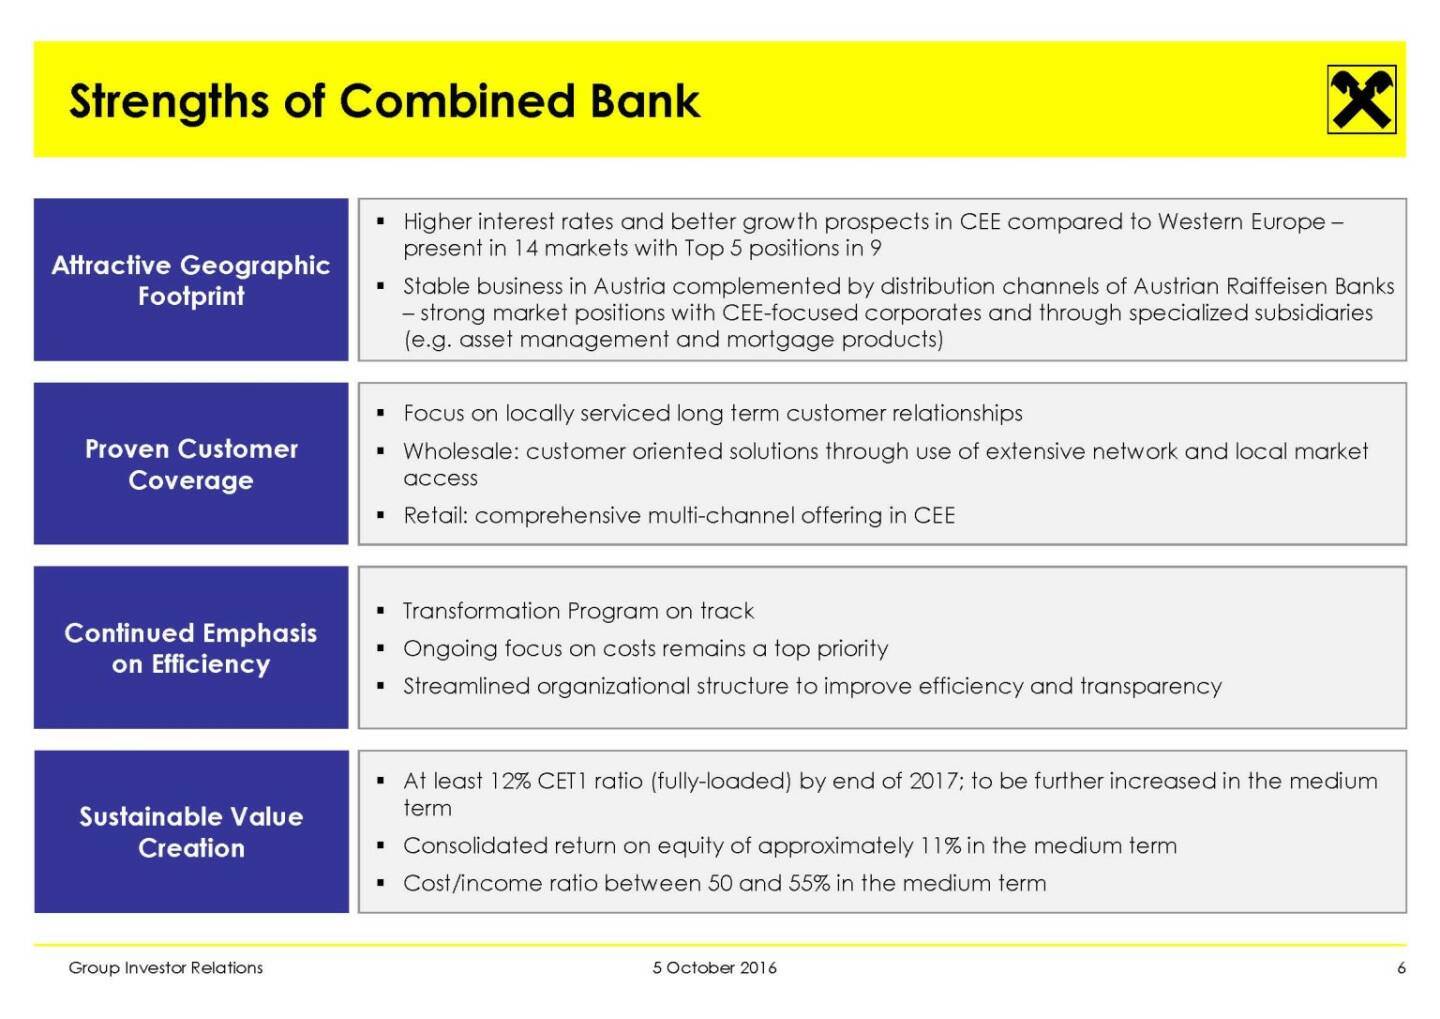 RBI - Strengths of Combined Bank